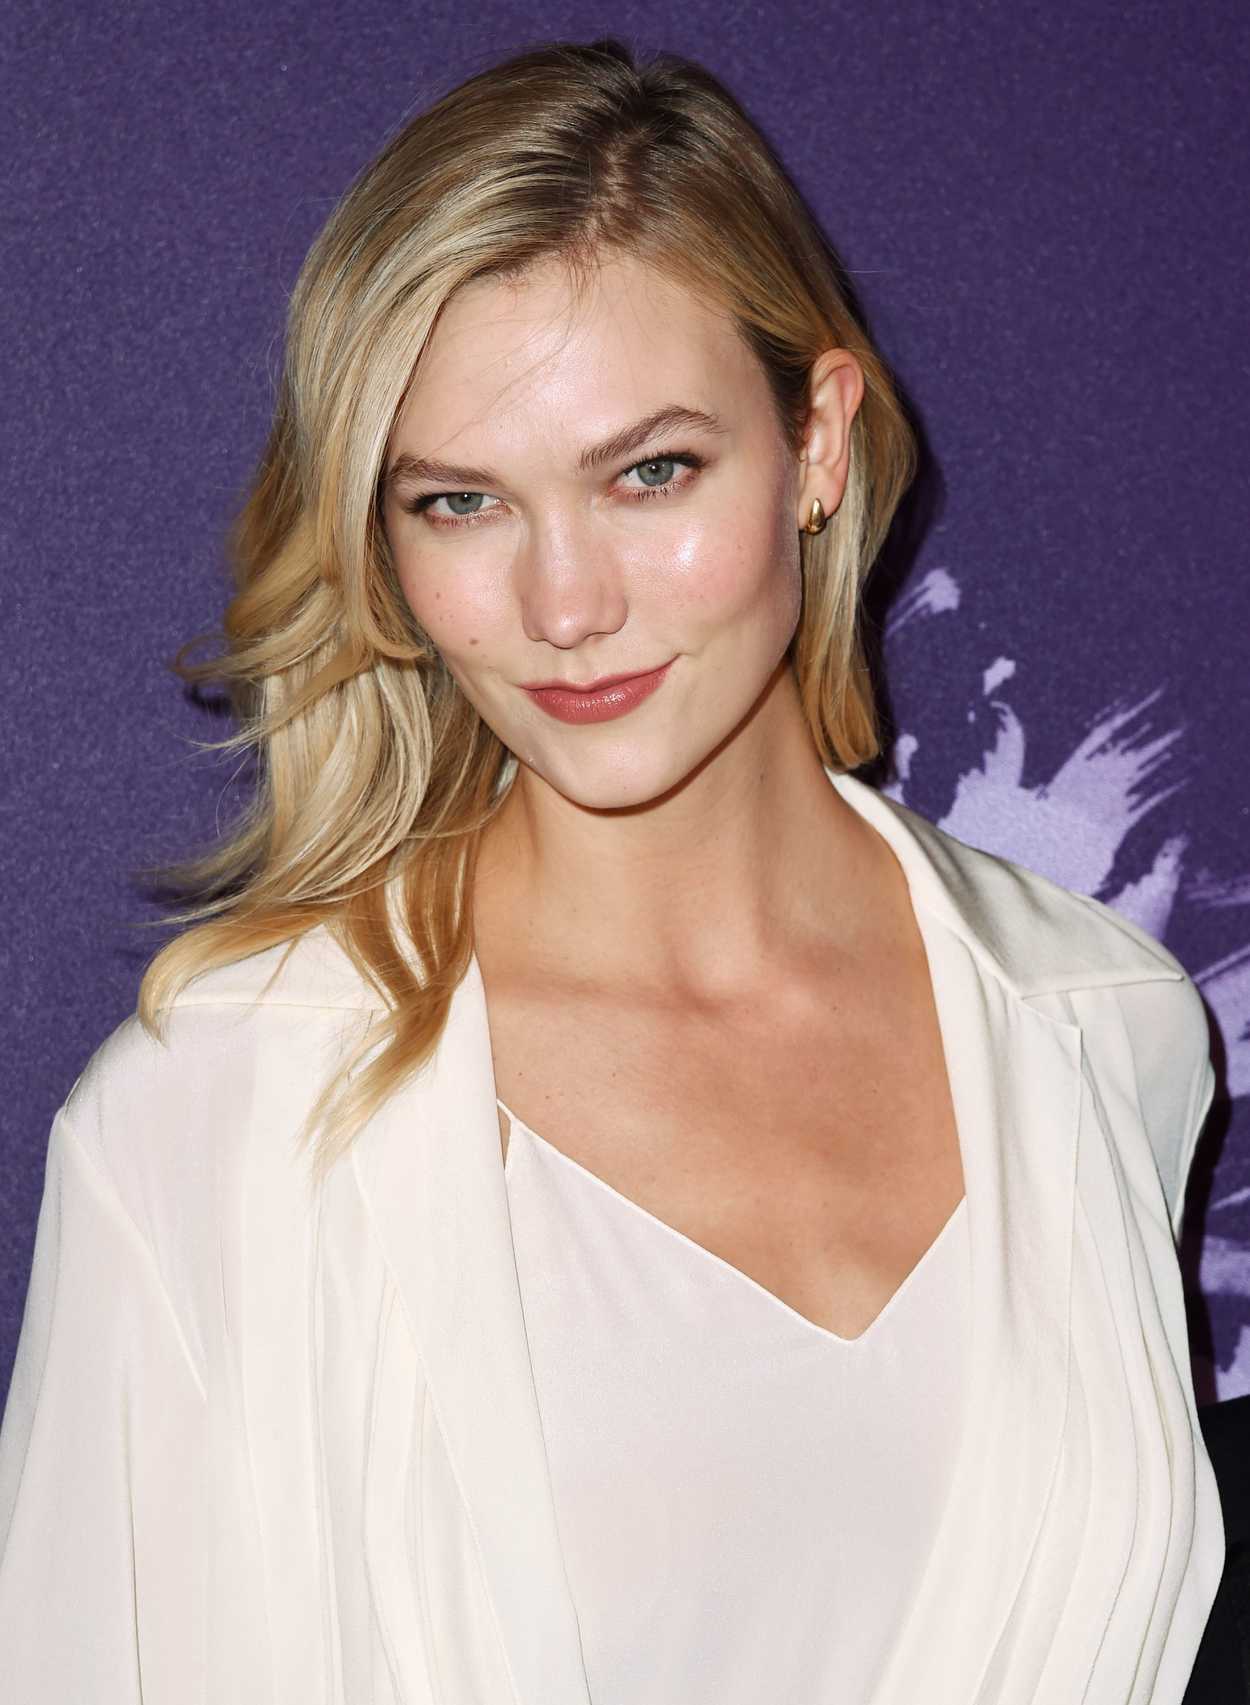 Karlie Kloss Attends the 3rd Annual Berggruen Prize Gala at the New ...